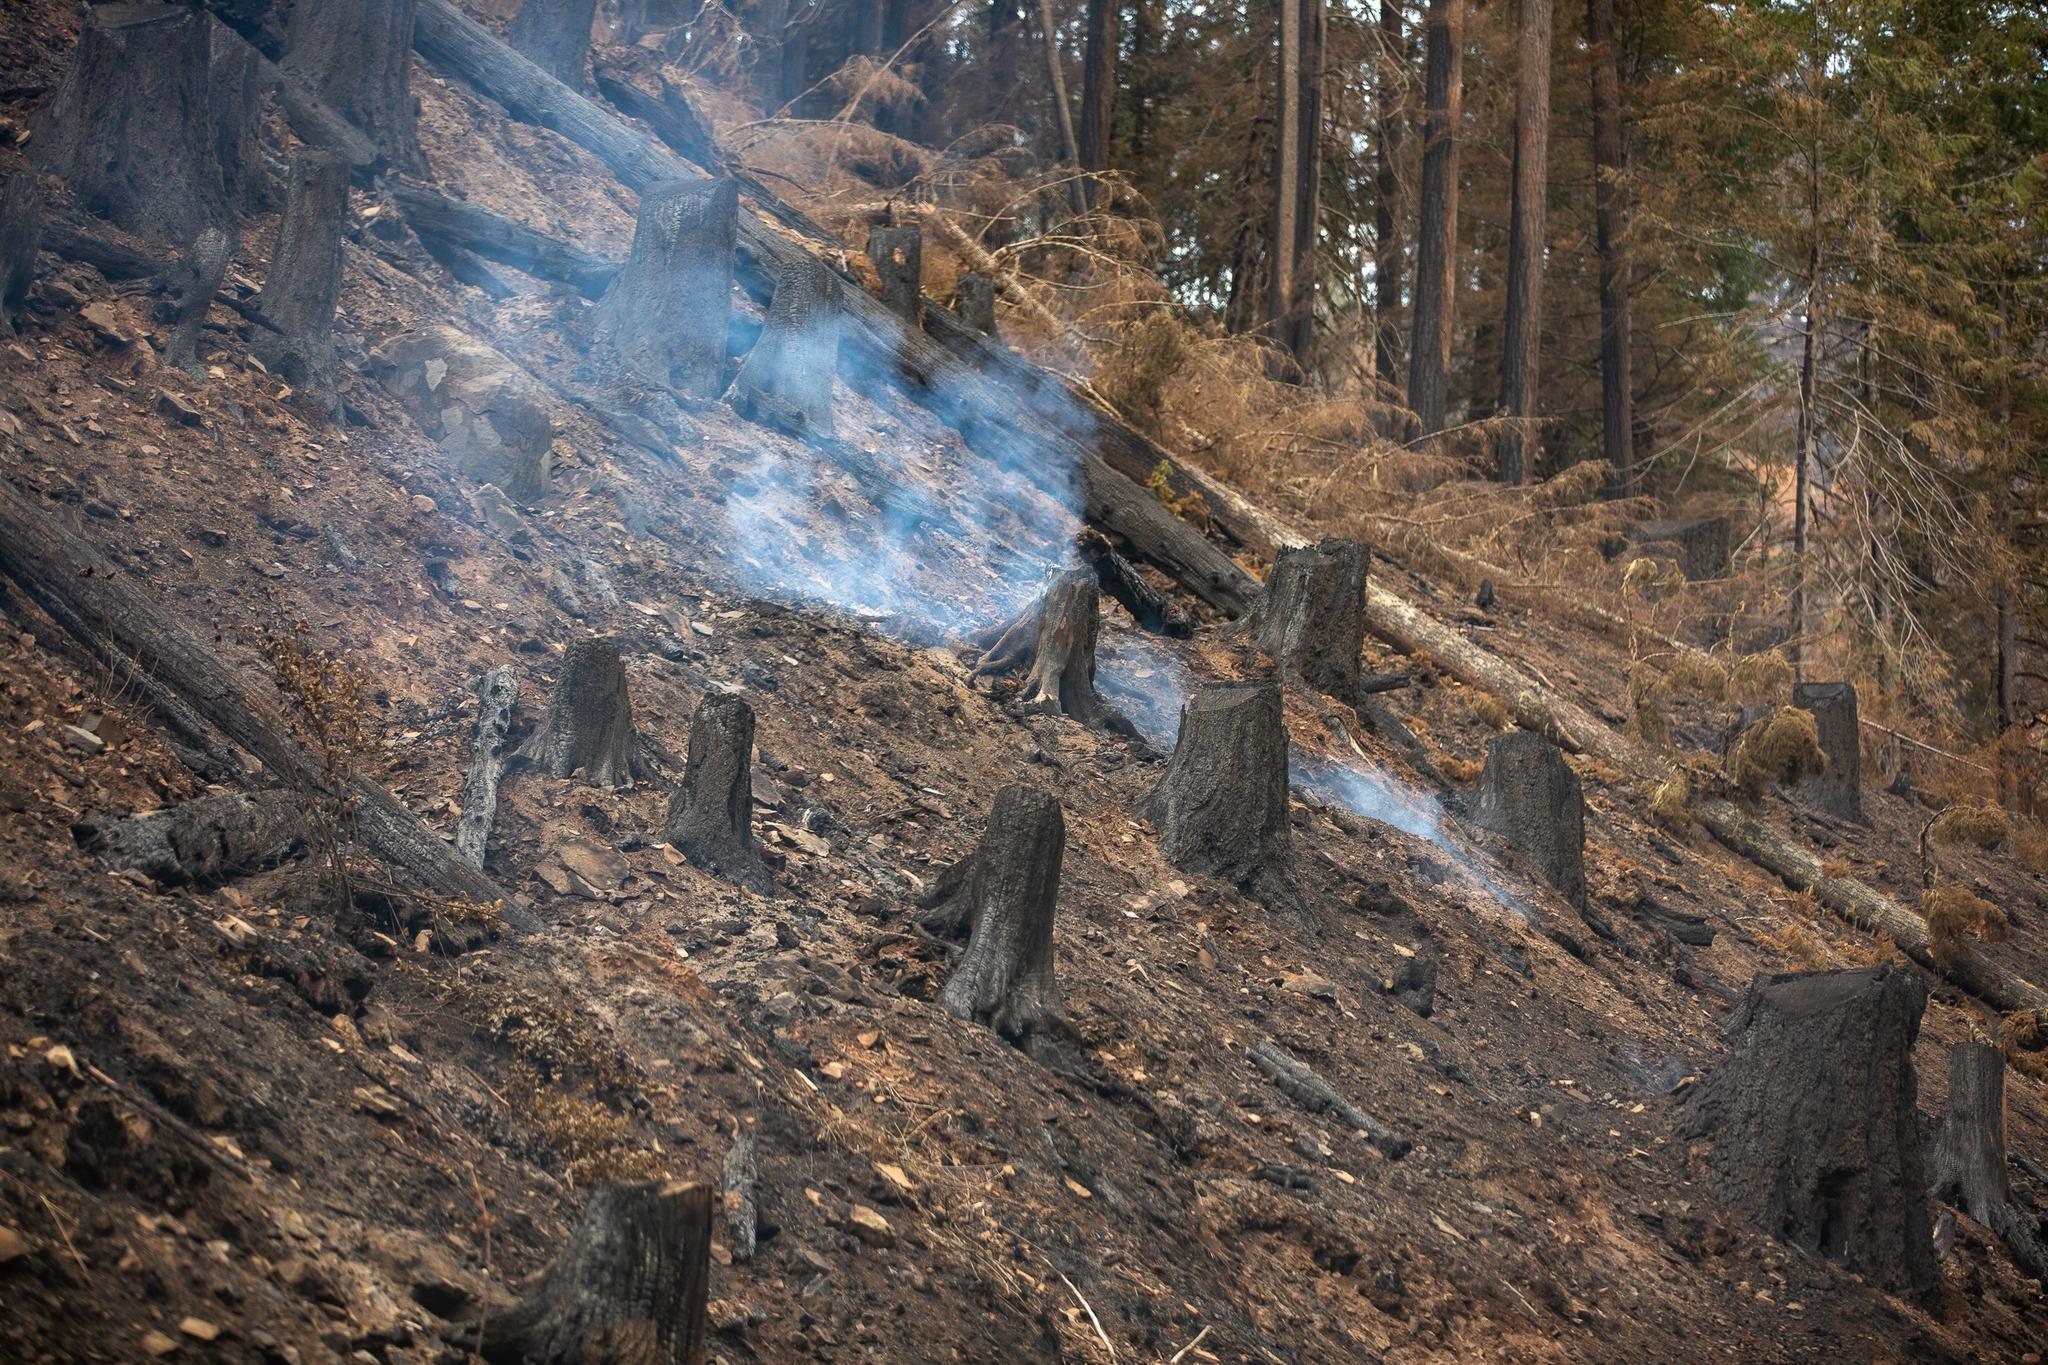 This an image of smoldering tree stumps